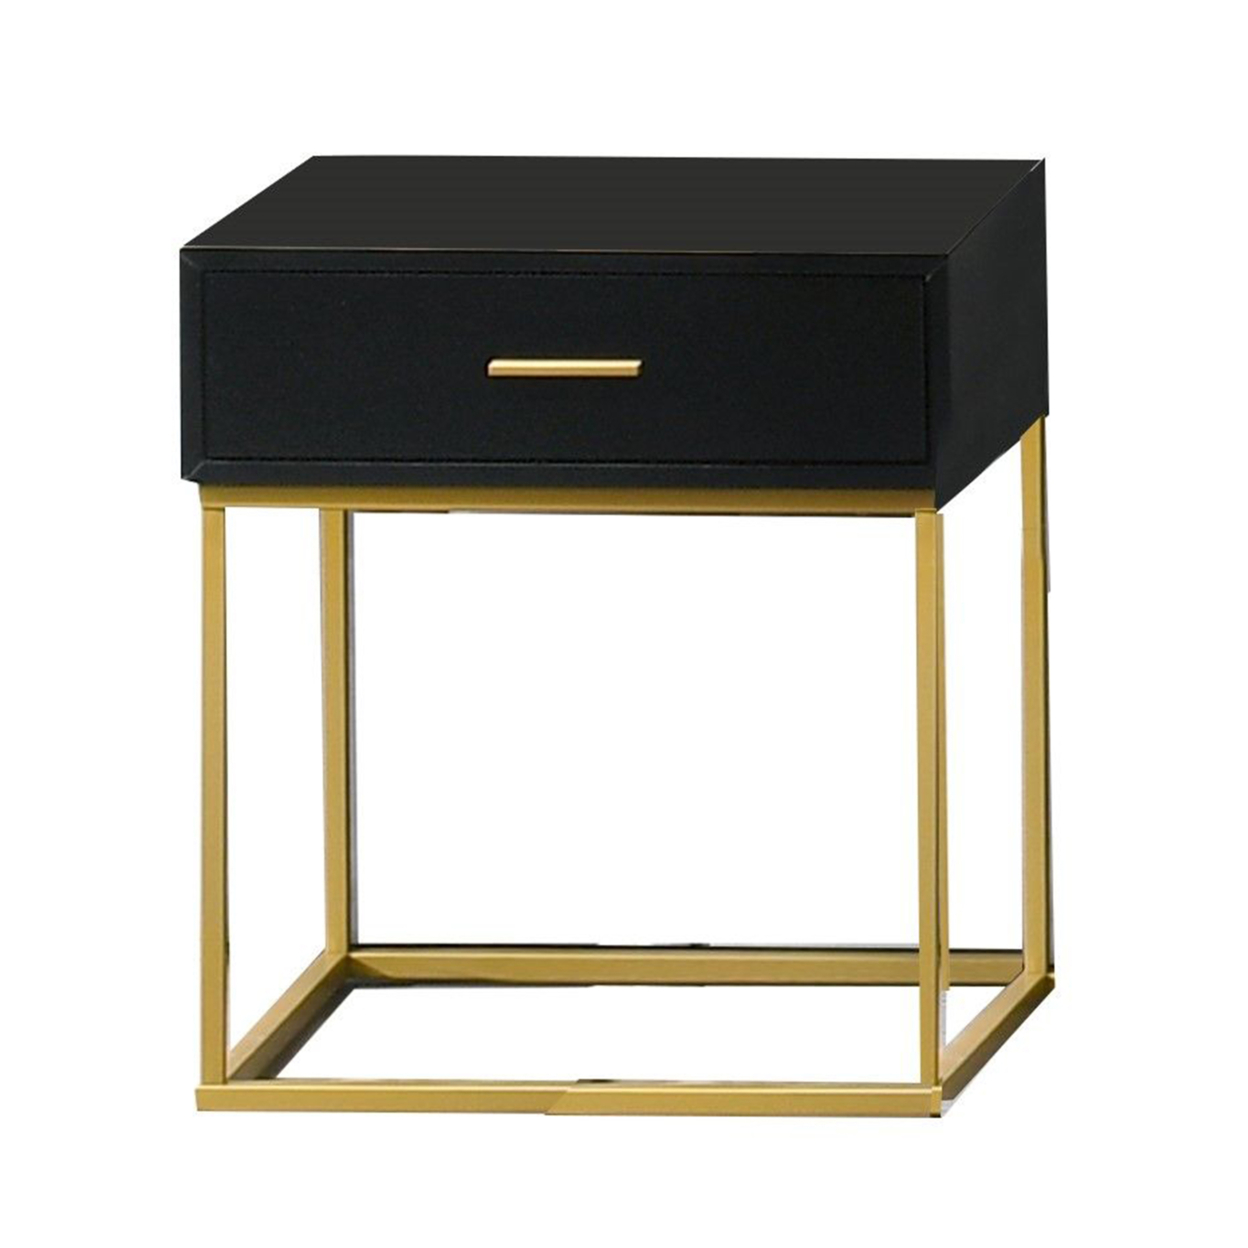 1 Drawer Wooden Nightstand With Metal Legs, Black And Gold- Saltoro Sherpi